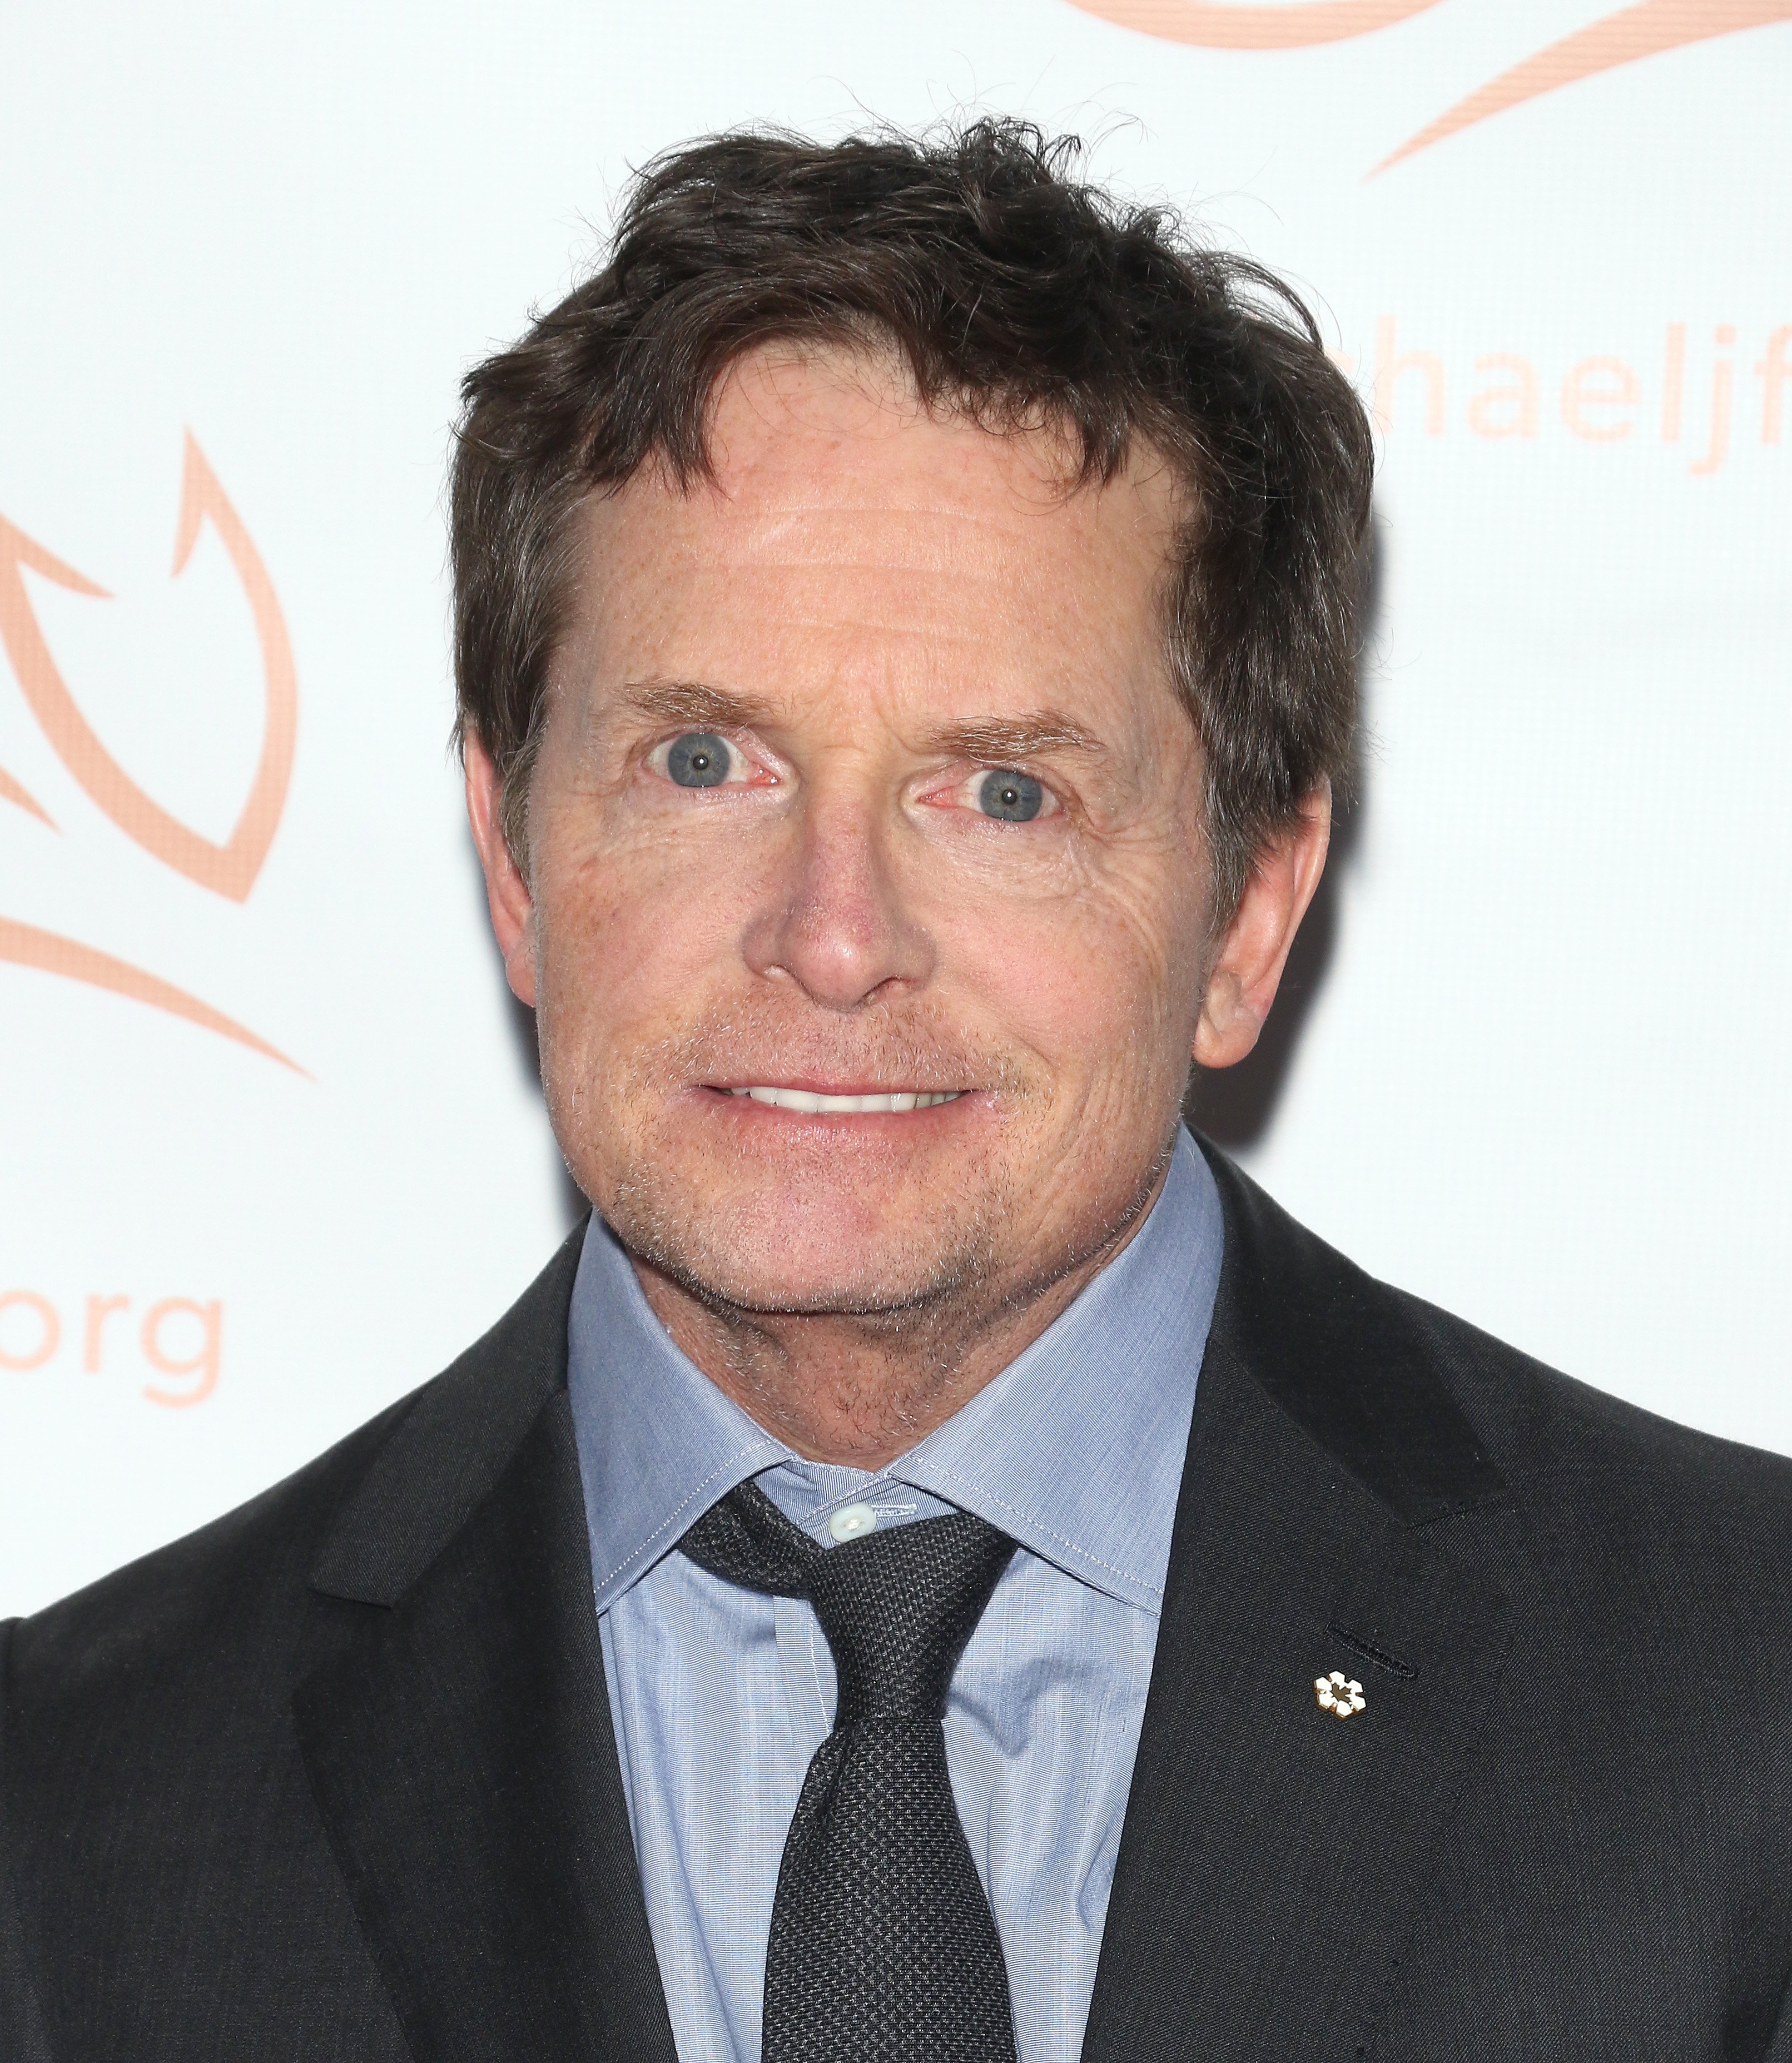 Michael J. Fox atthe A Funny Thing Happened On The Way To Cure Parkinson's at the Hilton New York on November 16, 2019, in New York City | Source: Getty Images